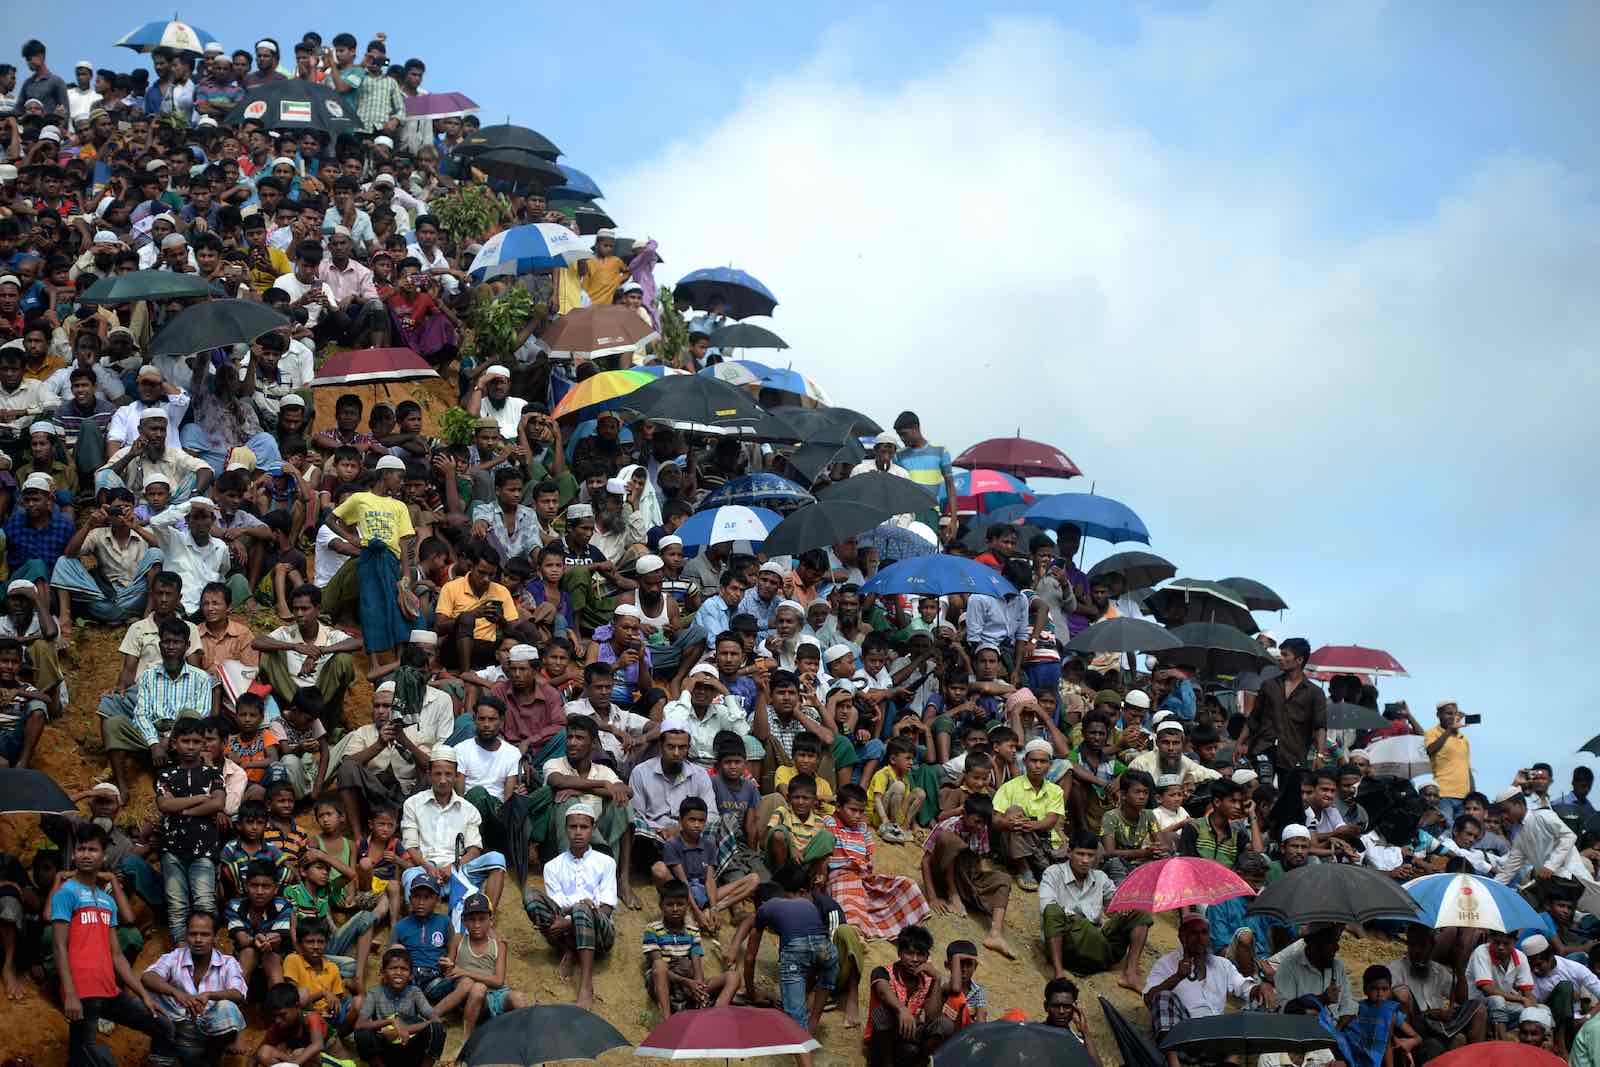 Kutupalong refugee camp in Ukhia on 25 August marking the second anniversary of a military crackdown that prompted a massive exodus of people from Myanmar to Bangladesh (Photo: Munir Uz Zaman/AFP/Getty Images